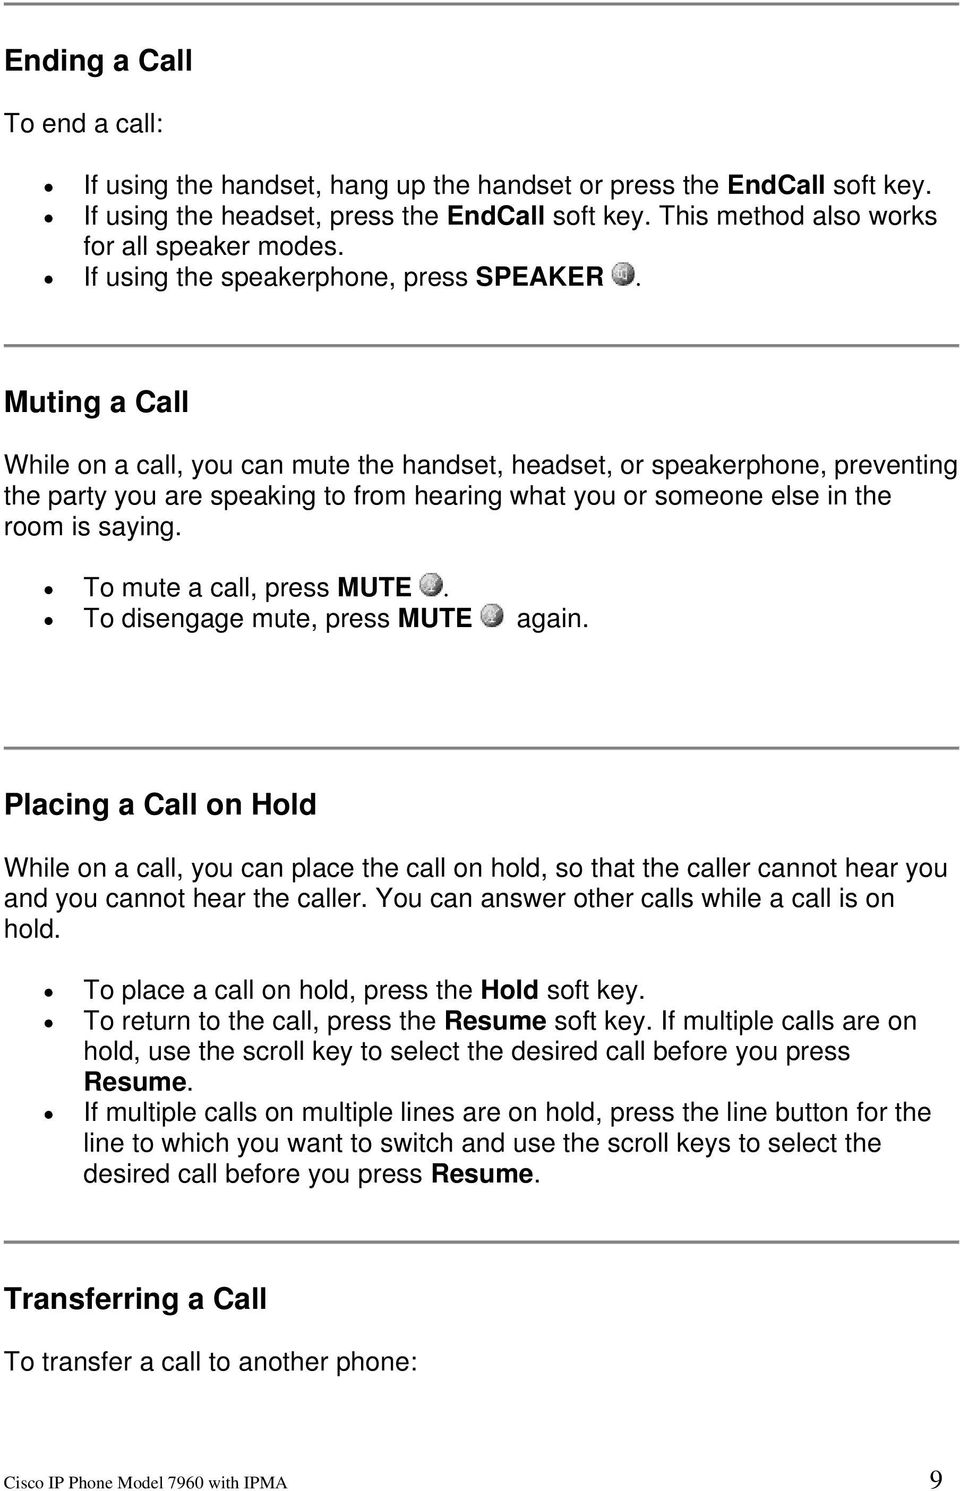 Muting a Call While on a call, you can mute the handset, headset, or speakerphone, preventing the party you are speaking to from hearing what you or someone else in the room is saying.